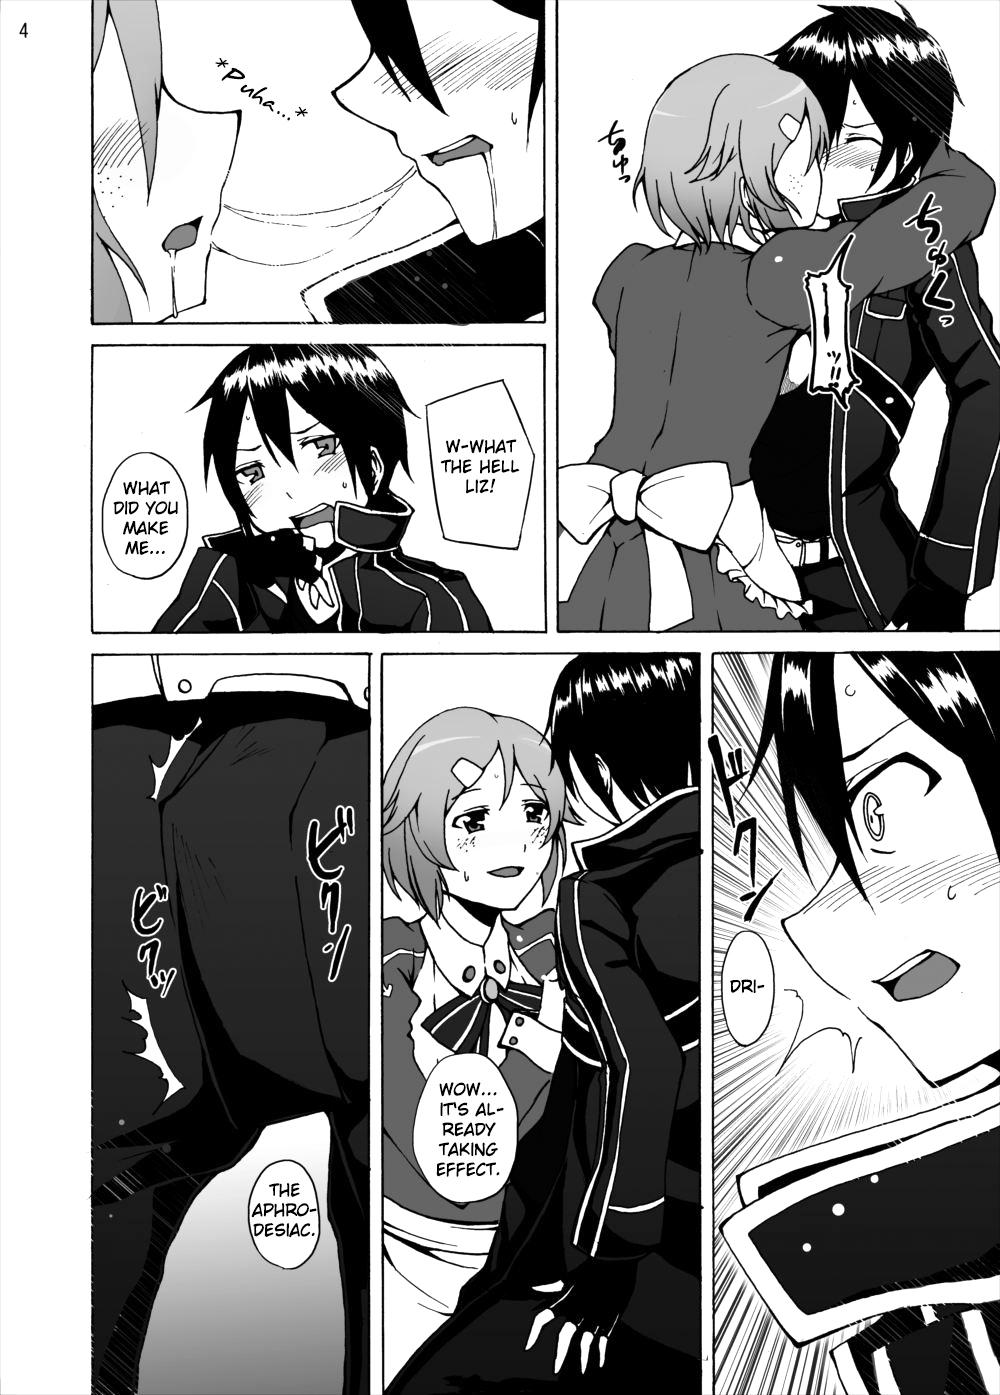 Master Lisbeth's Decision...To Steal Kirito From Asuna Even if She Has to Use a Dangerous Drug - Sword art online Kashima - Page 4